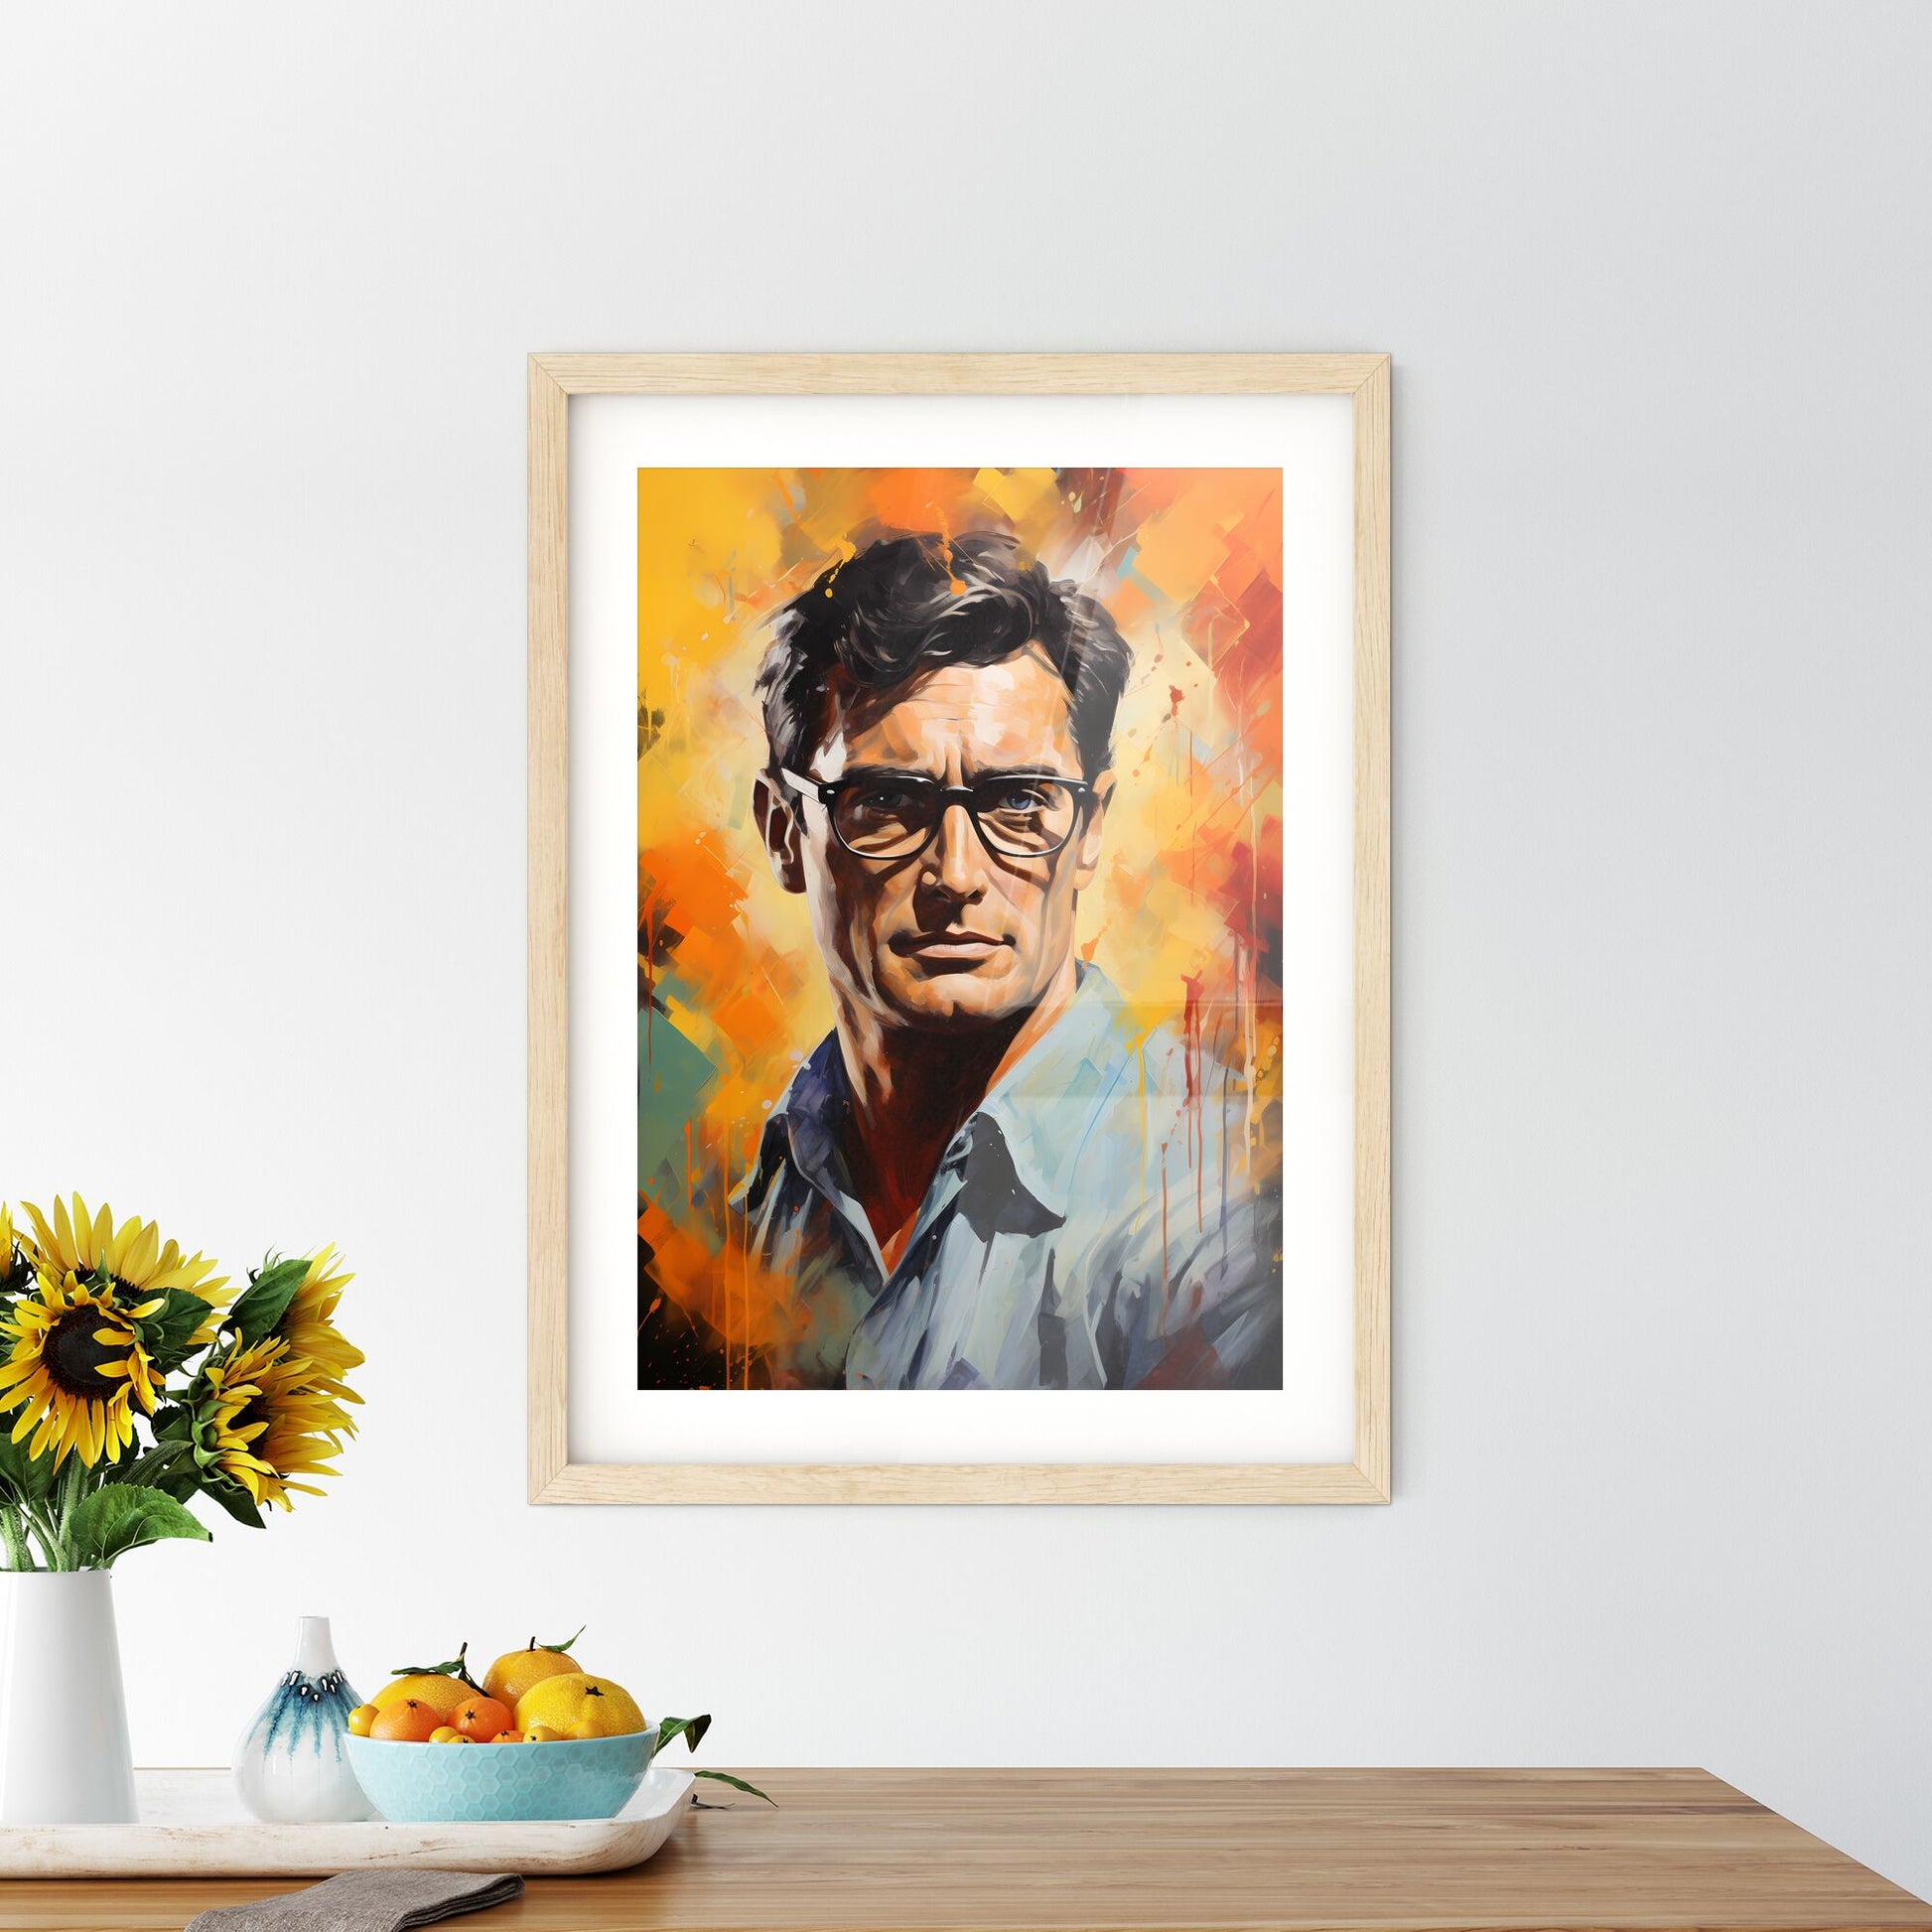 Atticus Finch Gregory Peck - A Painting Of A Man With Glasses Default Title